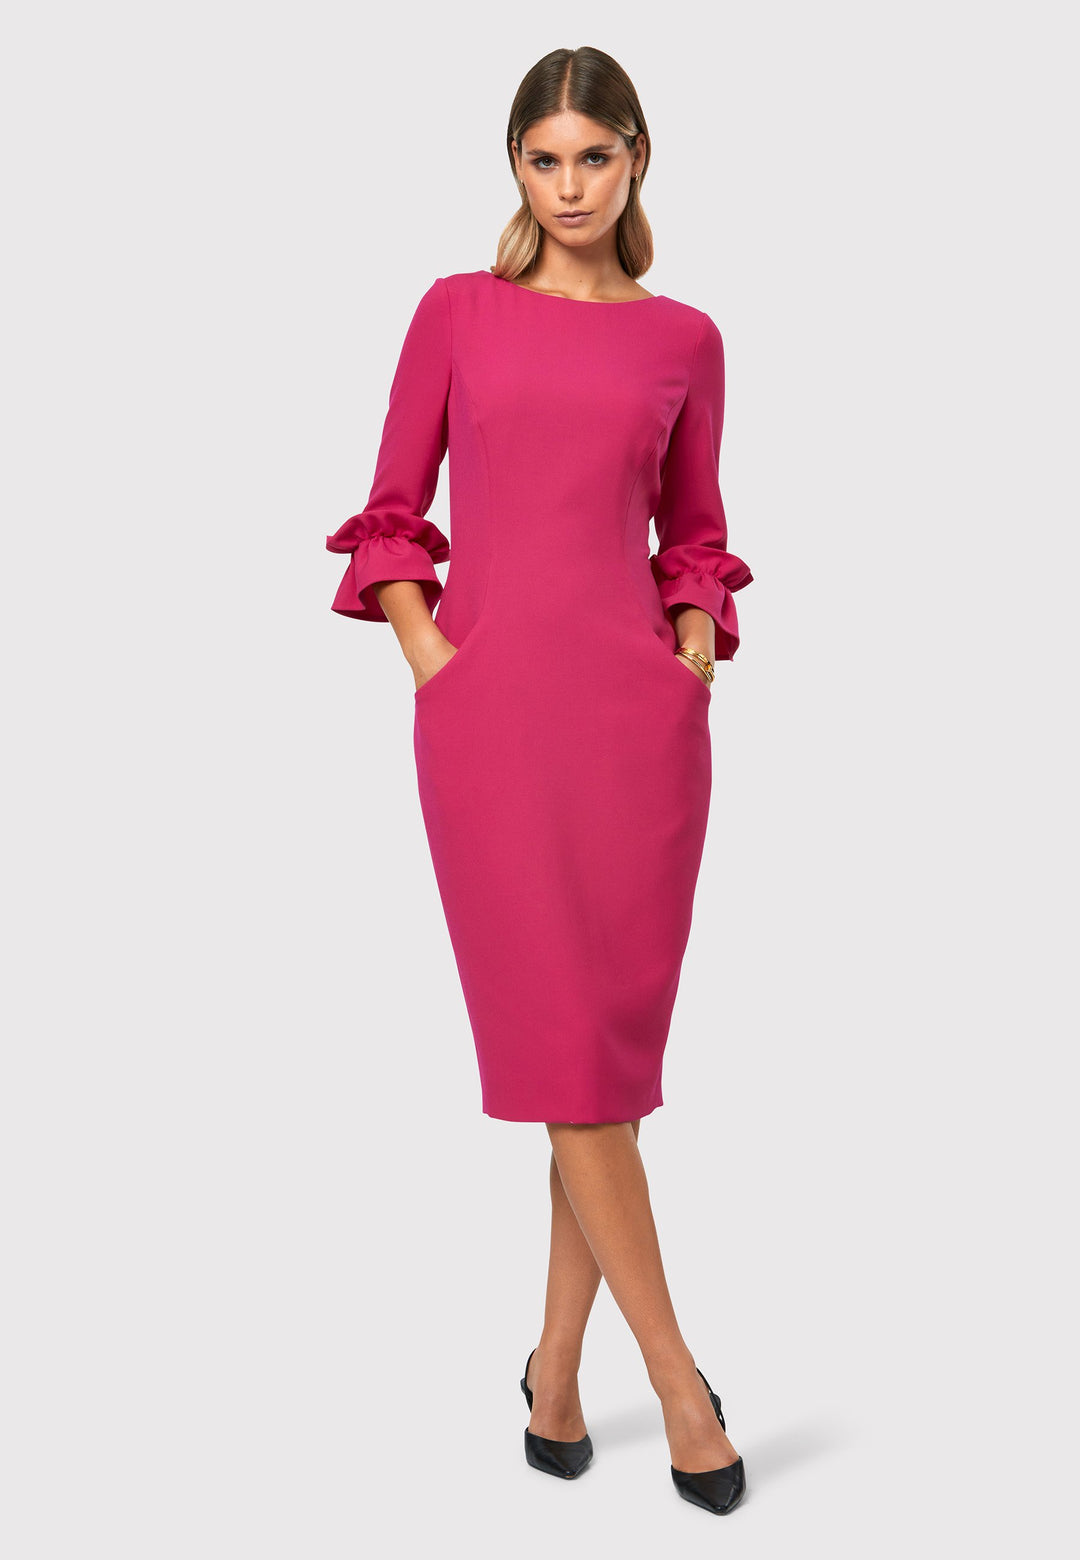 Unveiling the Maisie Cerise Pink Dress, a charming and stylish piece that exudes feminine allure. With its flattering body-skimming silhouette and elegant slash neckline, this dress is perfect for special events or making a statement. Falling to a chic mid-calf length with a back vent providing ease of movement. The fabric incorporates a hint of stretch, ensuring a comfortable and flattering fit. The playful puff frill sleeves add a touch of romance, making it a versatile and captivating choice.